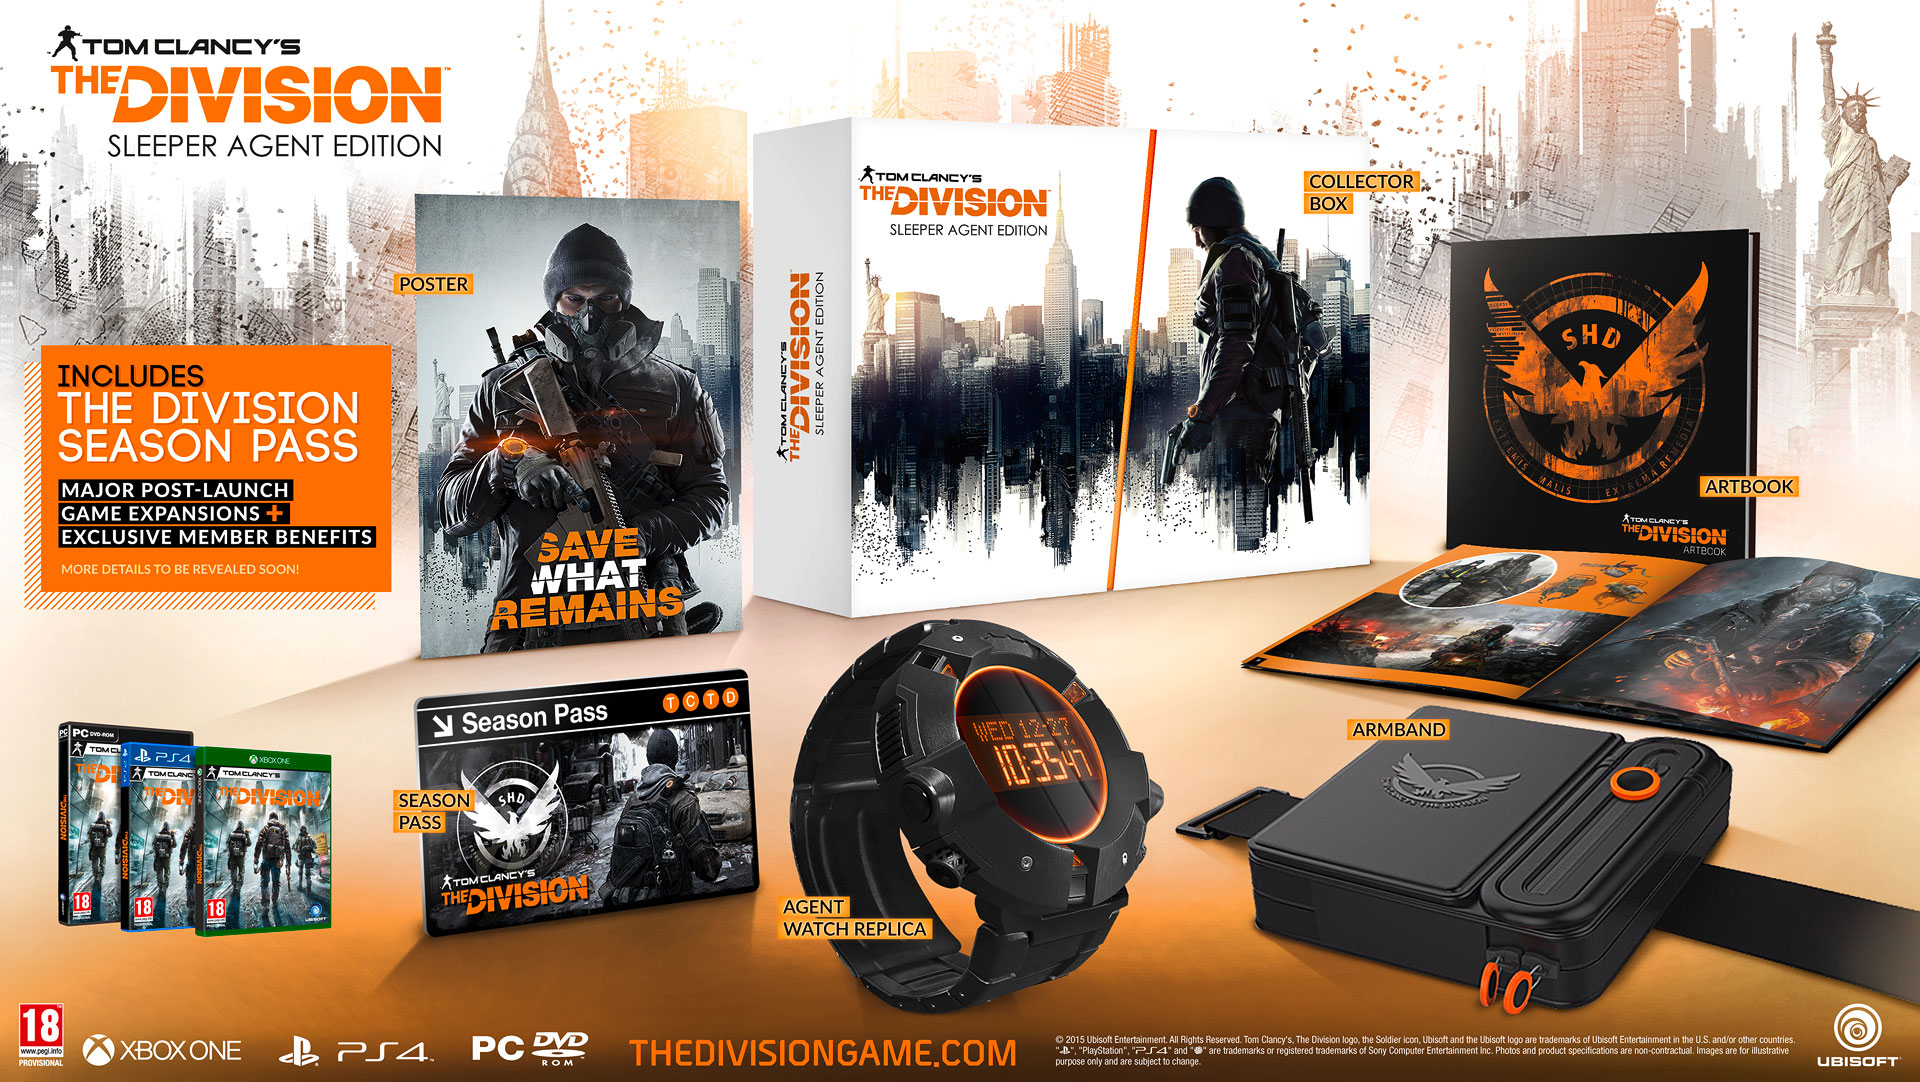 the division sleeper agent edition